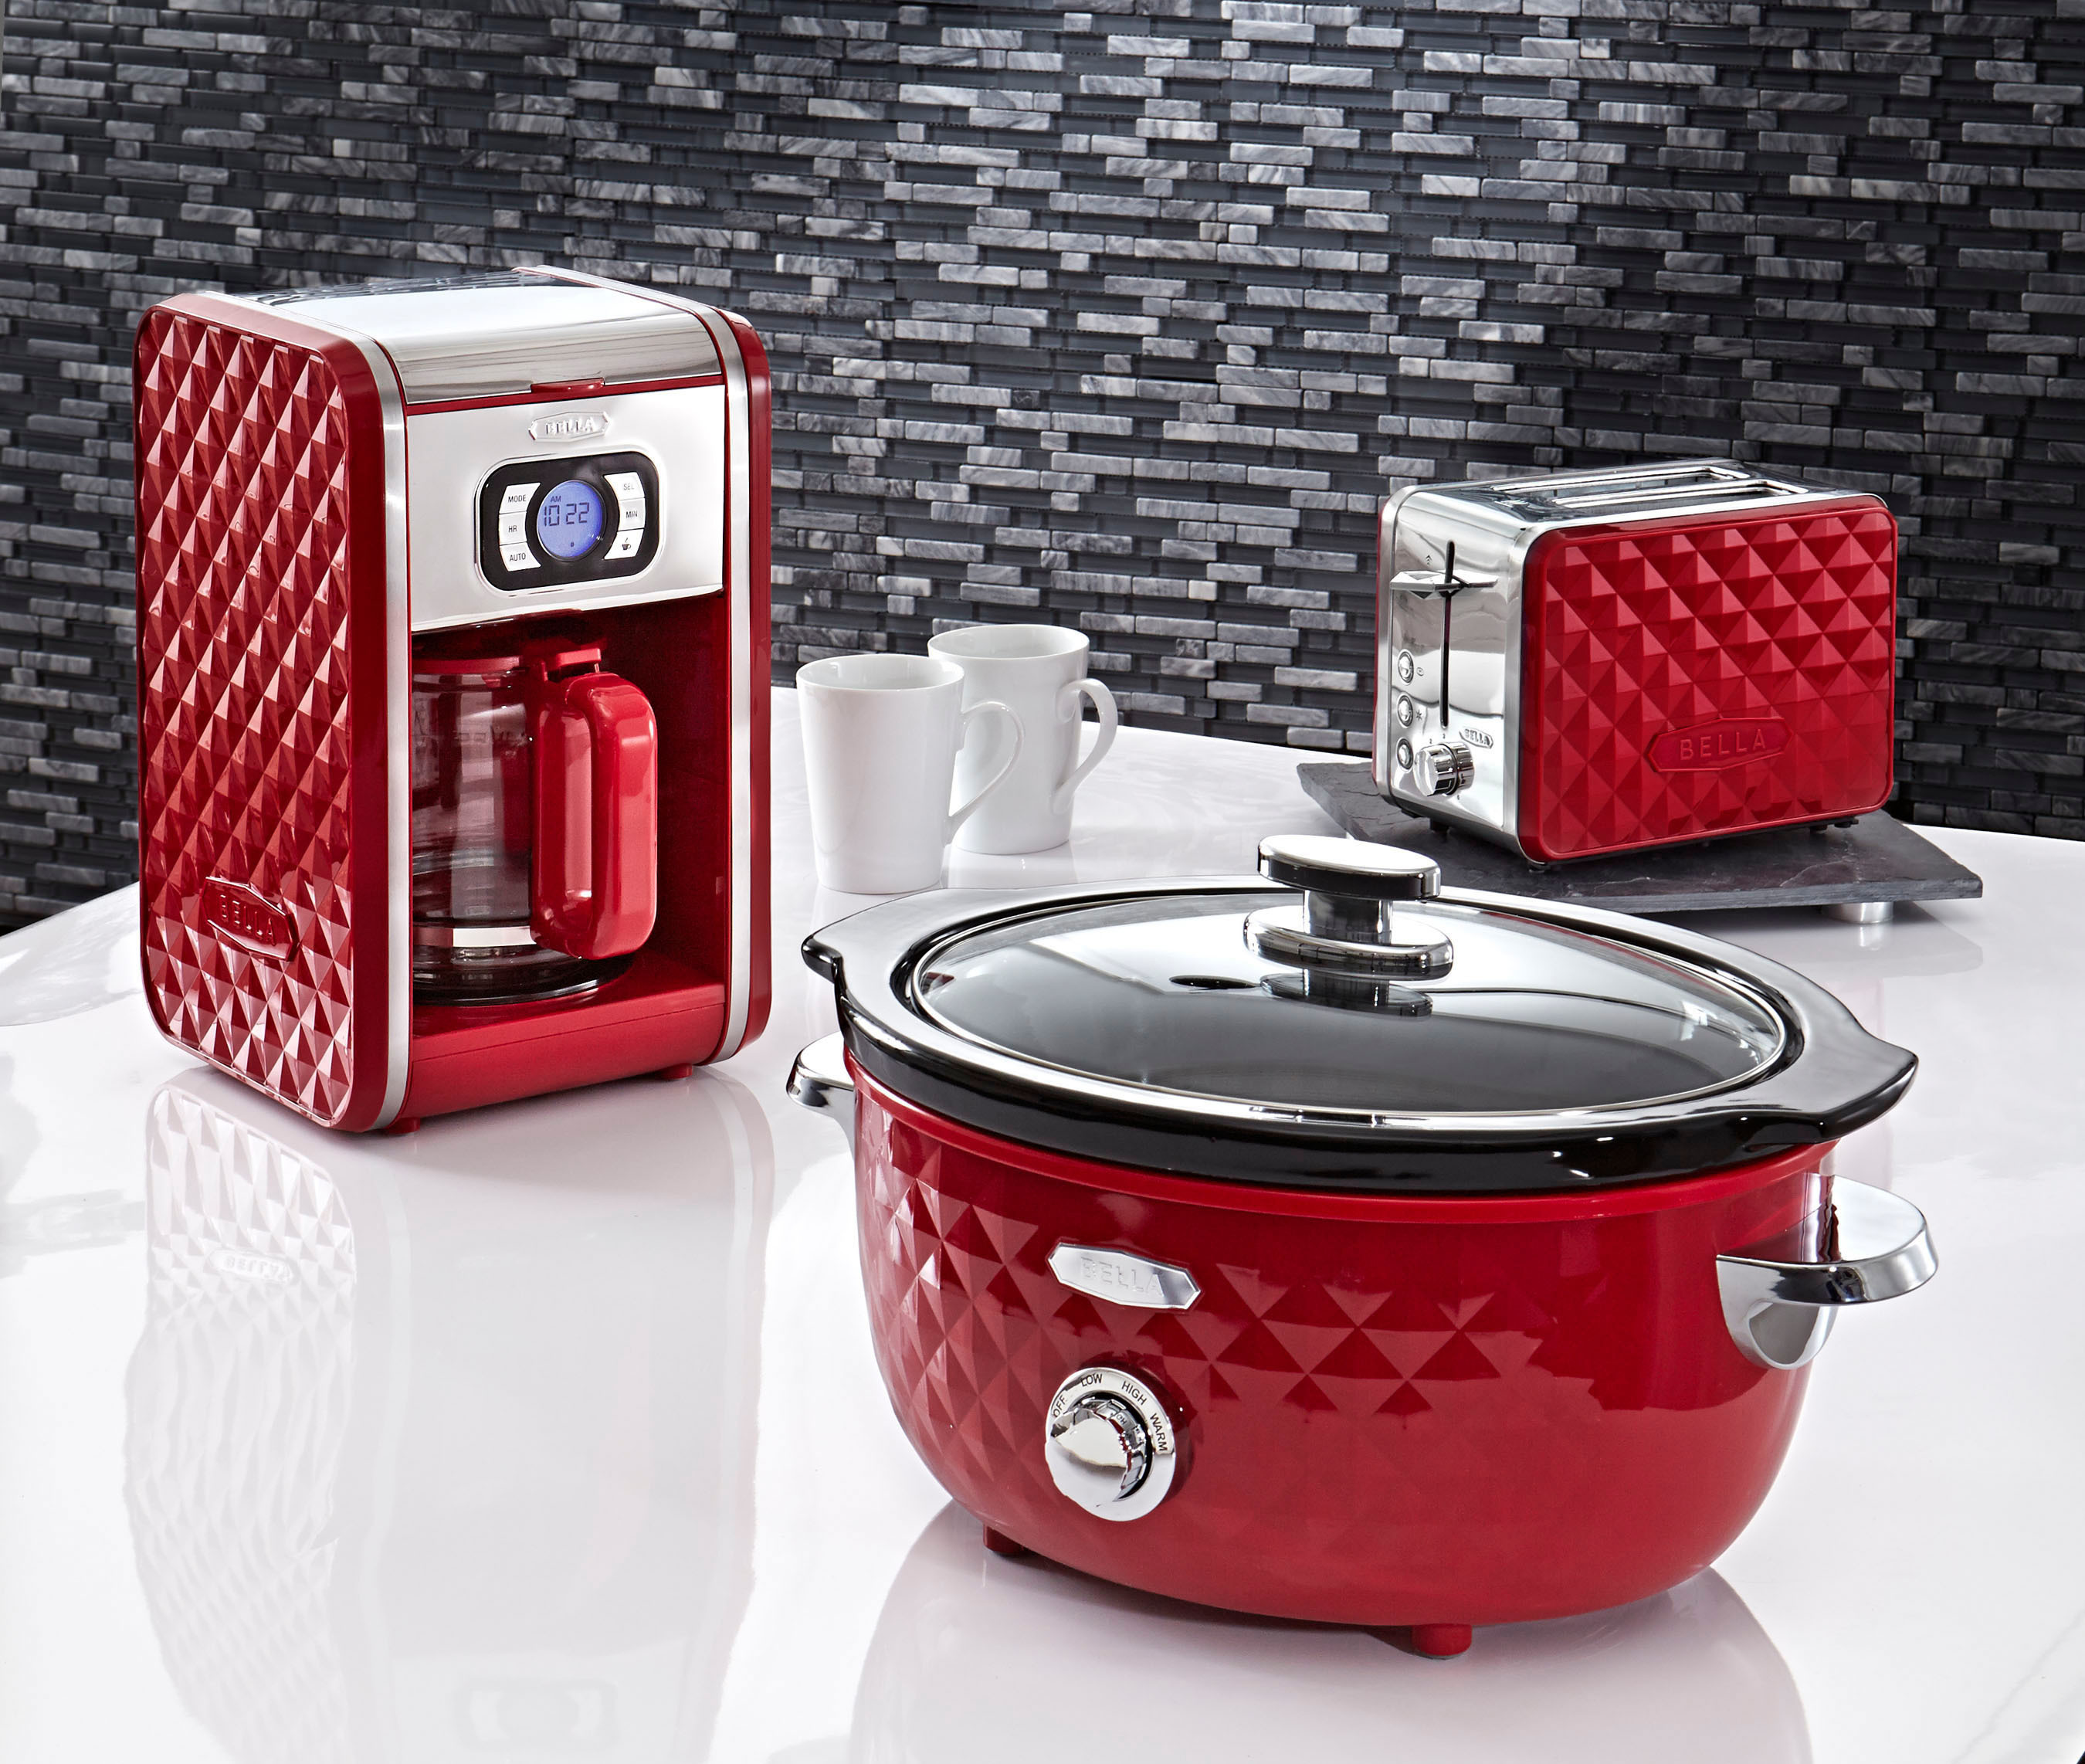 BELLA Expands Its Fashionable Line Of Specialty Kitchen Appliances